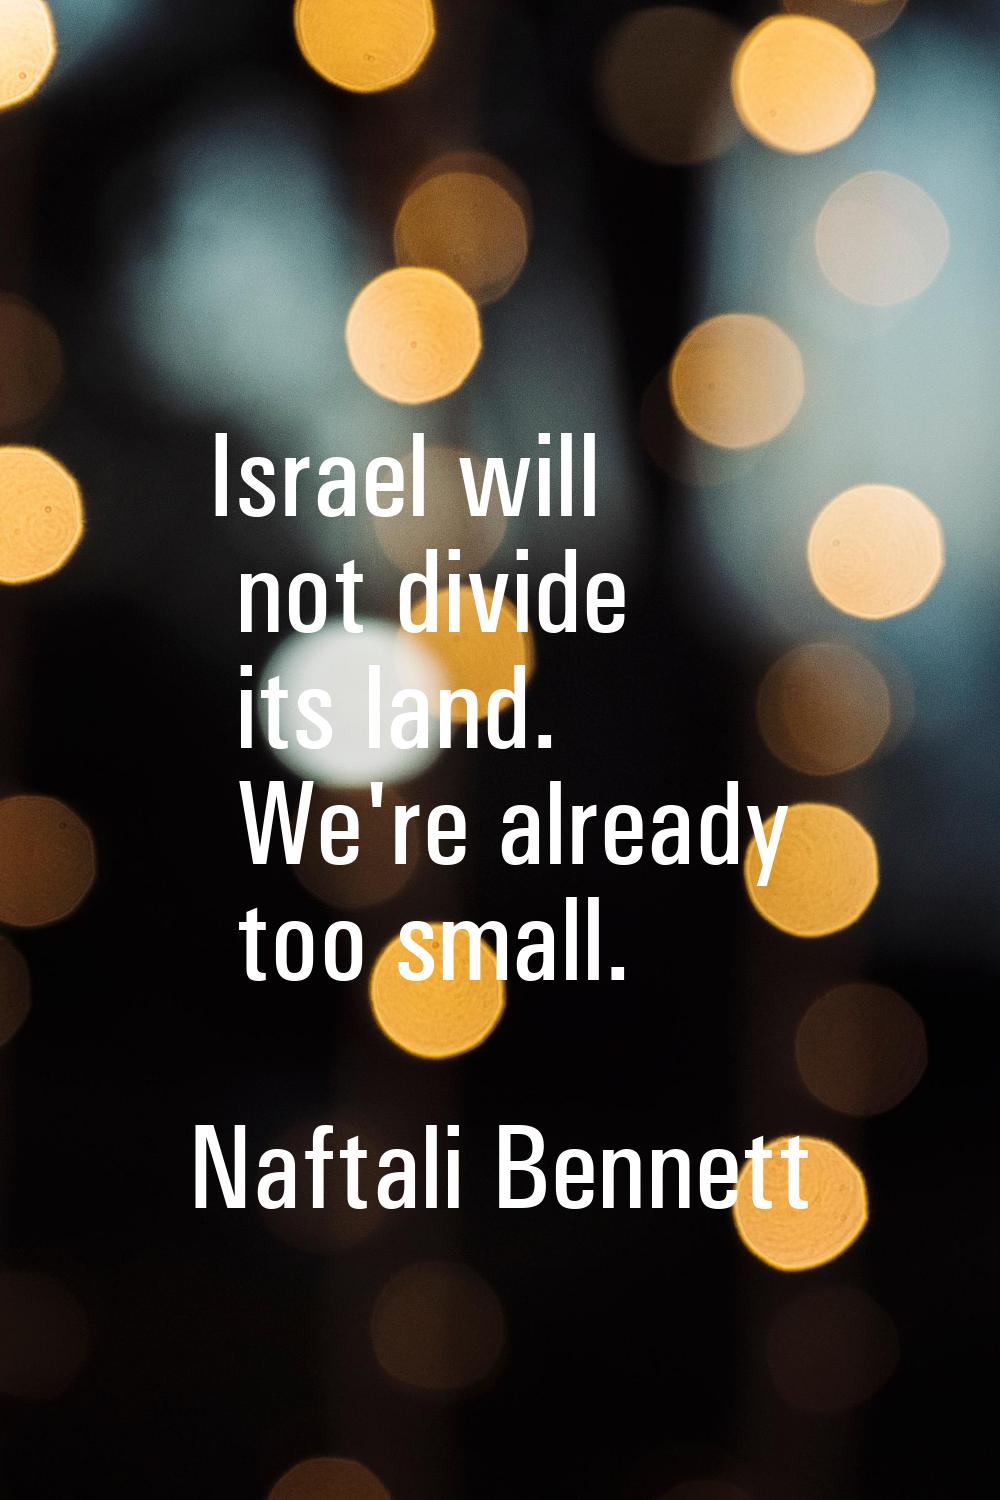 Israel will not divide its land. We're already too small.